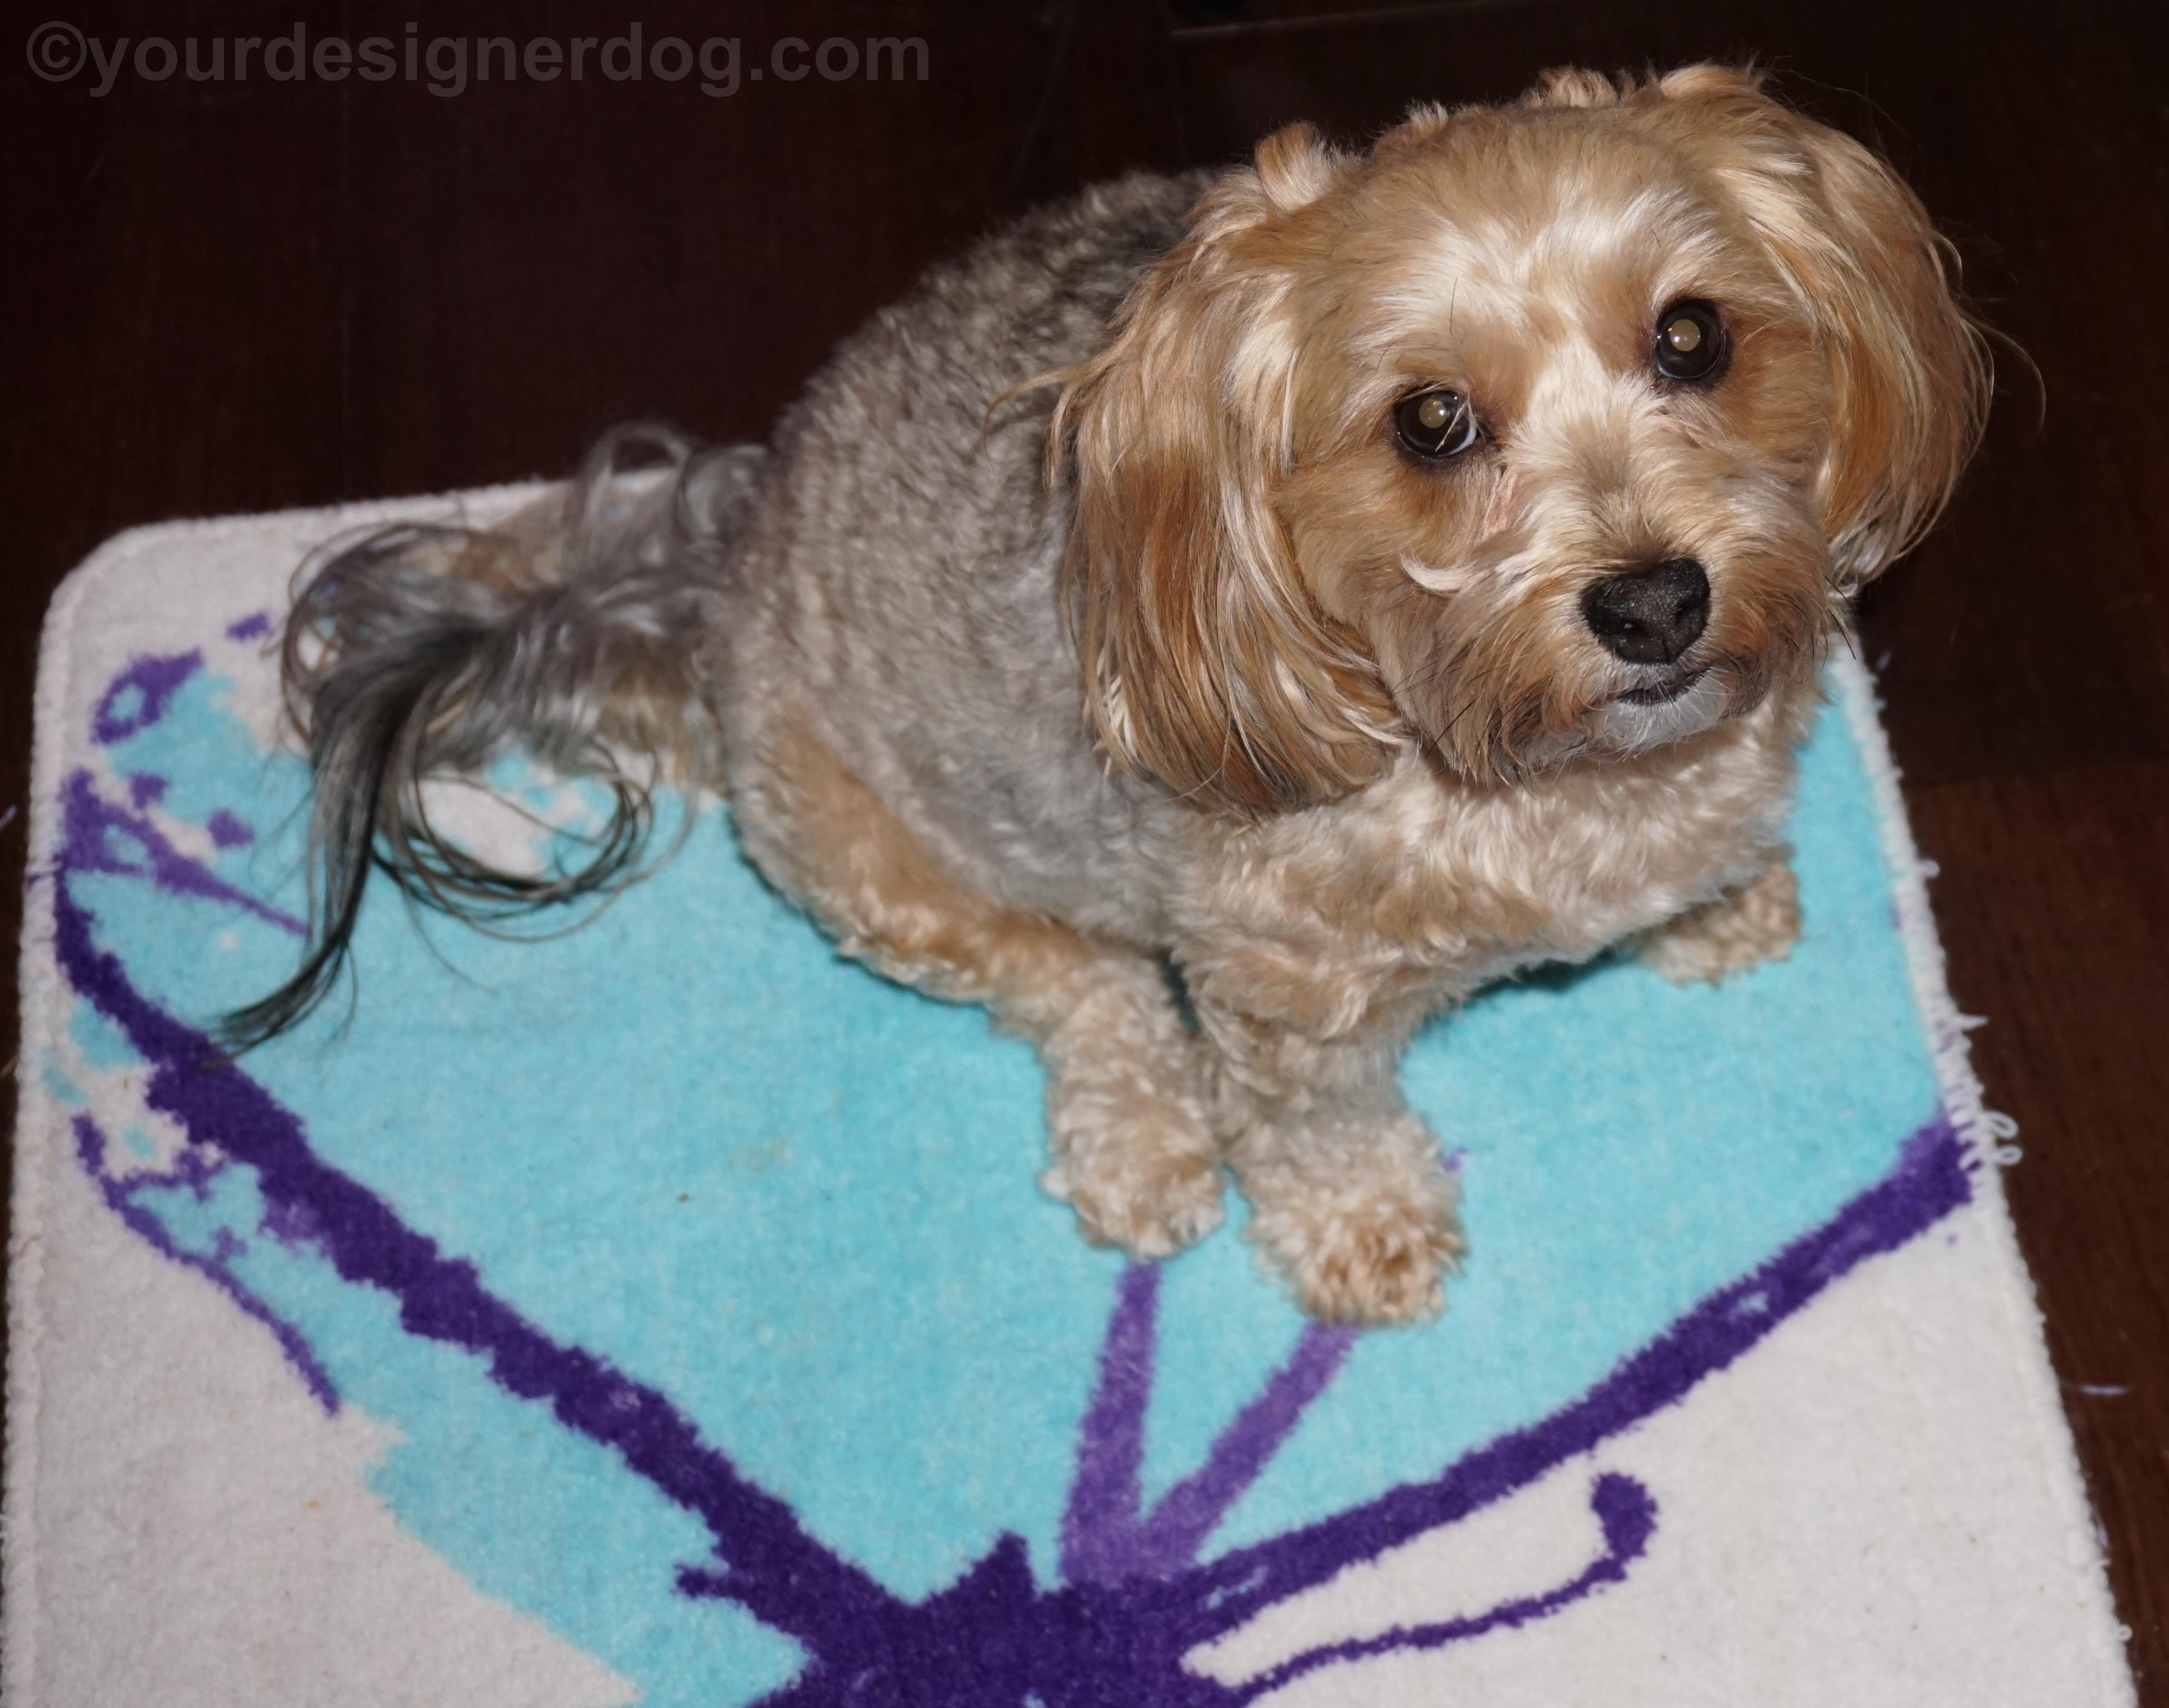 dogs, designer dogs, yorkipoo, yorkie poo, butterfly